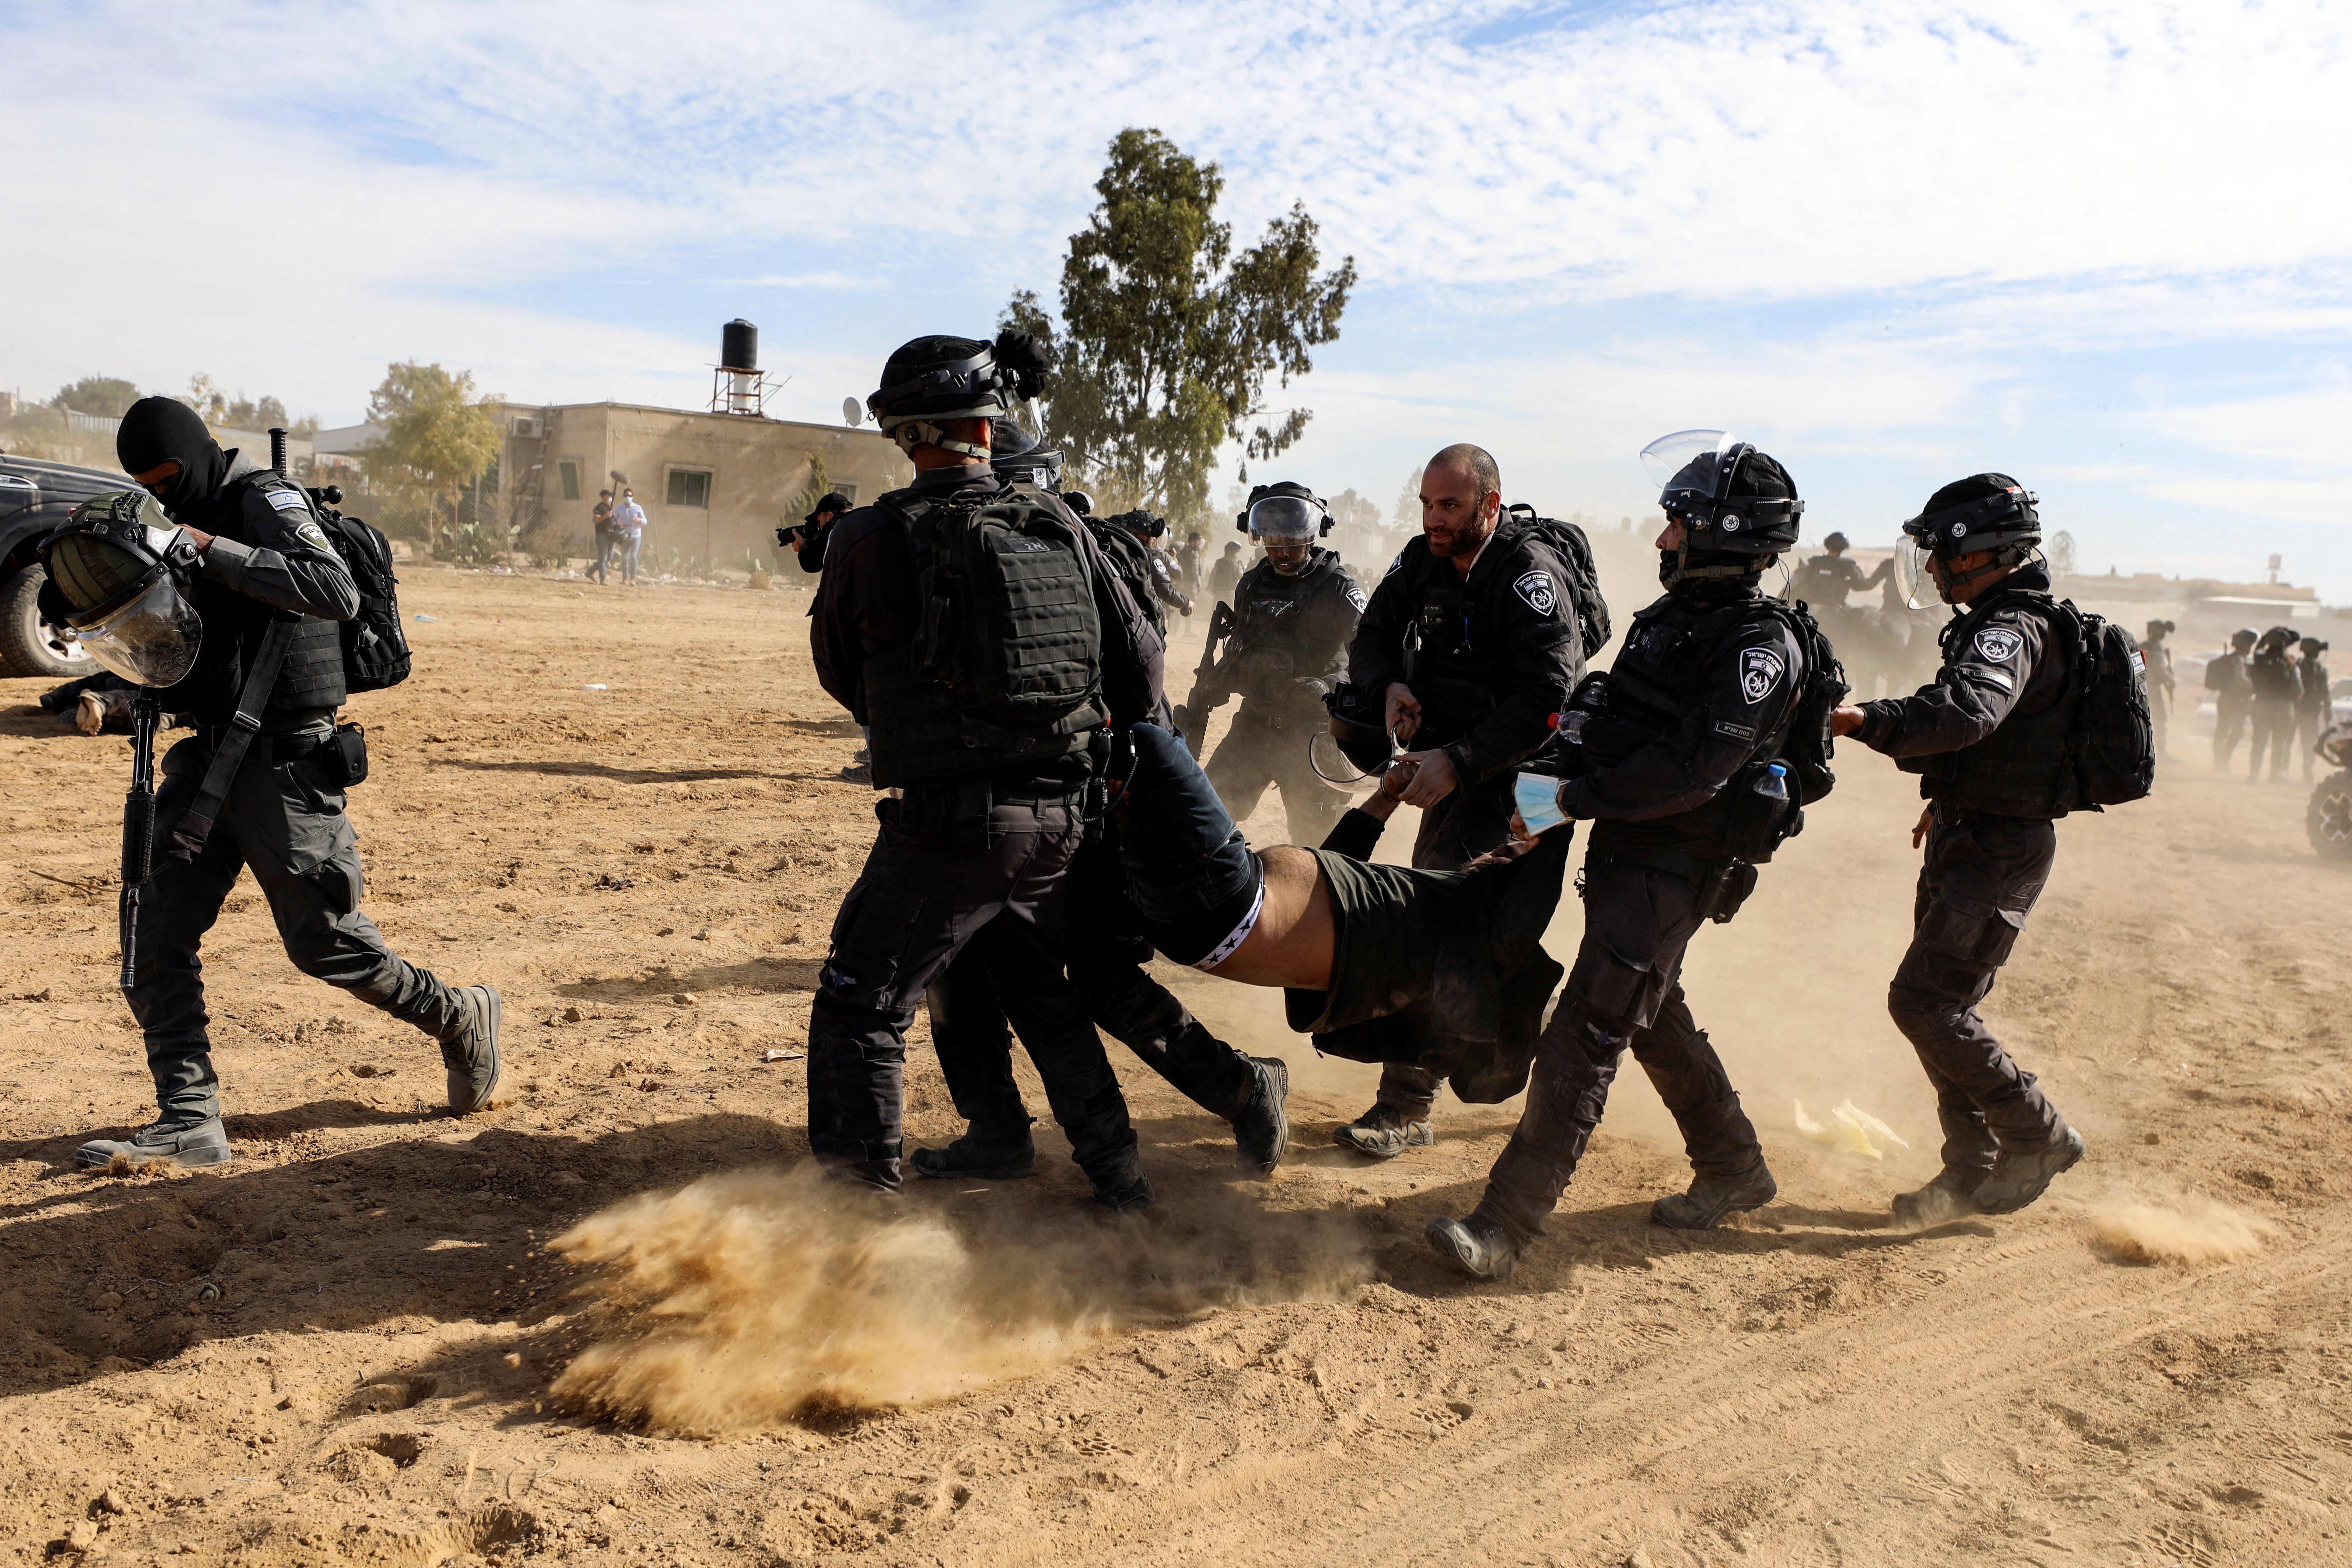 Israeli security forces clash with Bedouins during protest against forestation